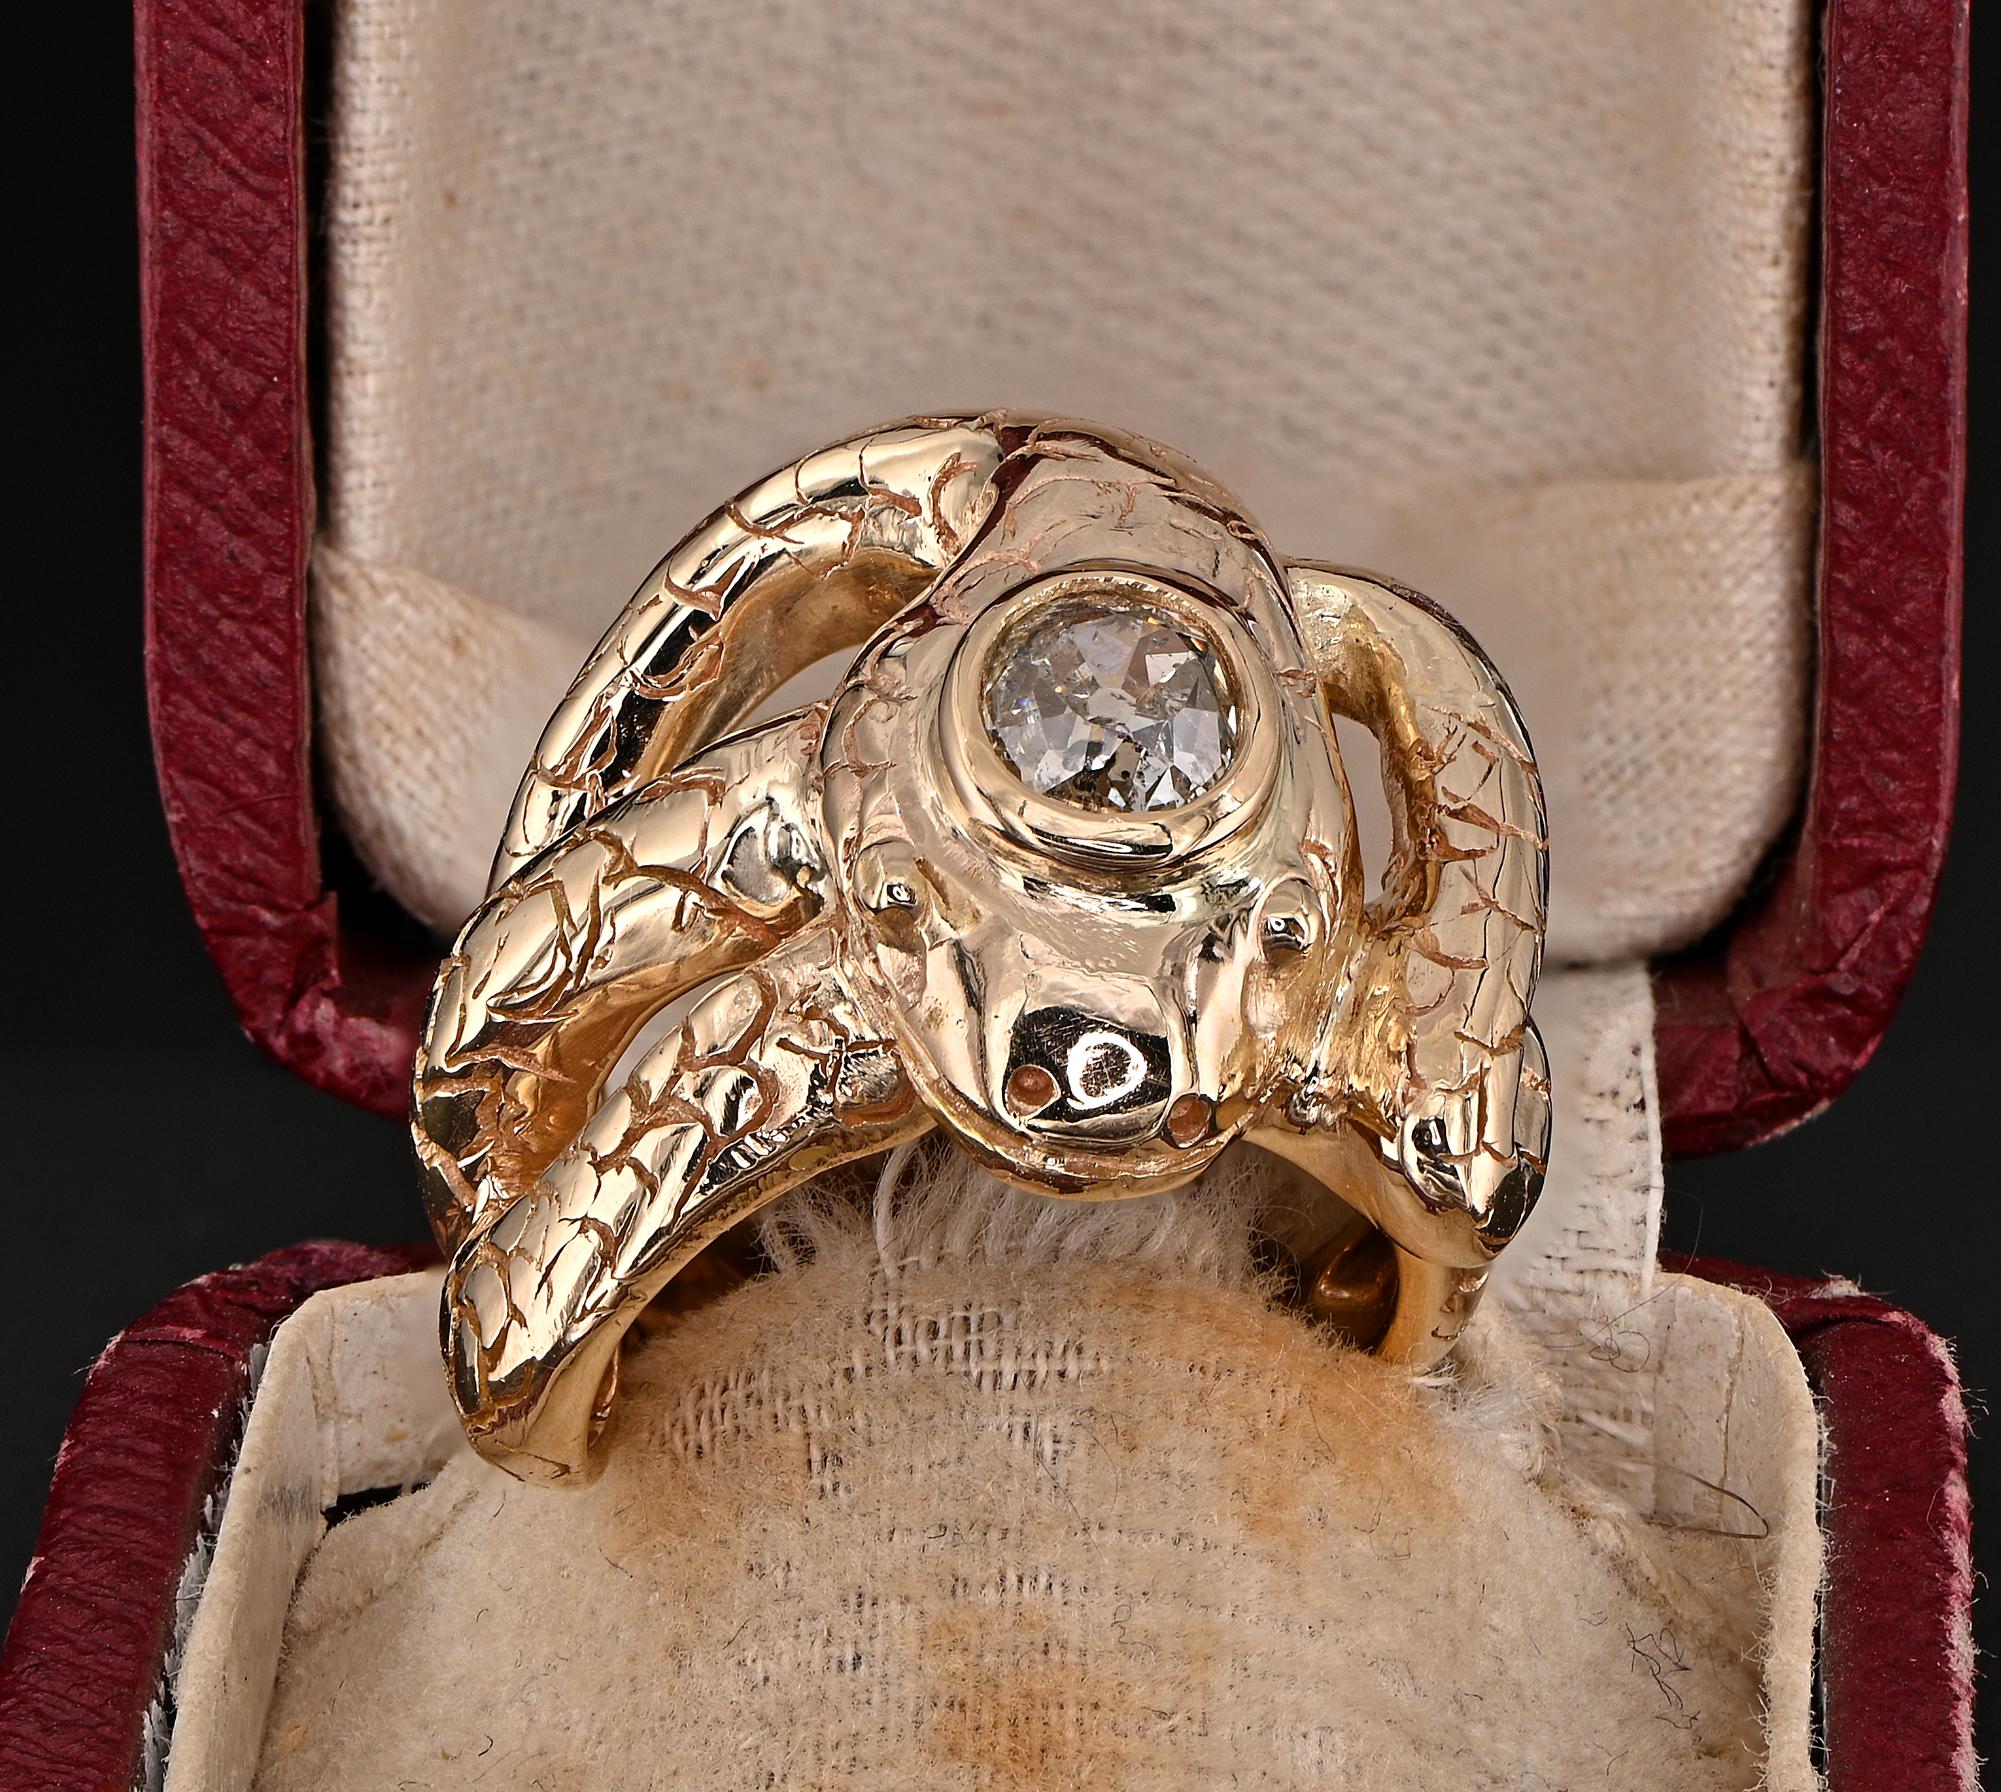 Symbol of Eternity
This impressive Victorian period snake ring is 1900 ca
Hand crafted of solid 14 KT gold, massive and large scale, featuring an intricate coiled snake with large head laid on its coiled body, suitable for either sex special for a